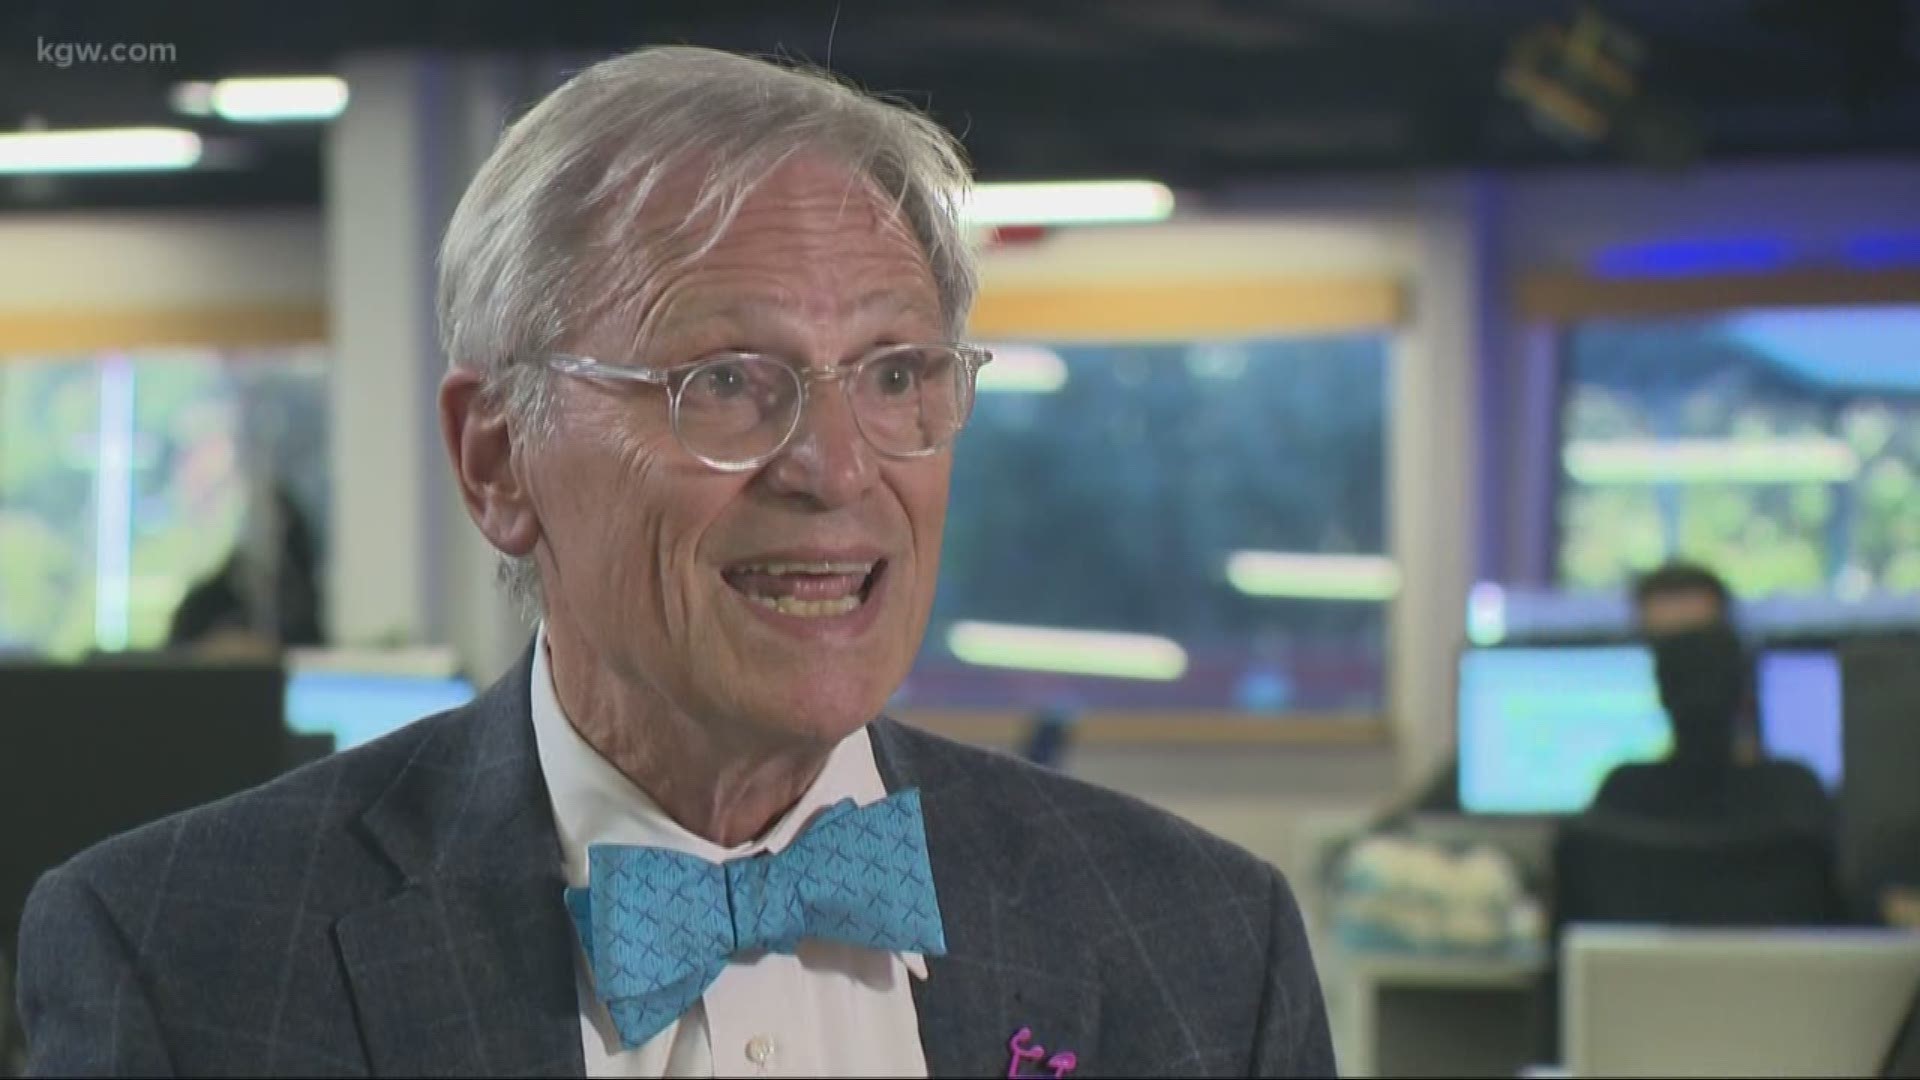 Blumenauer said people should boycott hotels owned by Gordon Sondland, the U.S. ambassador to the EU, until he testifies in the impeachment inquiry into Trump.